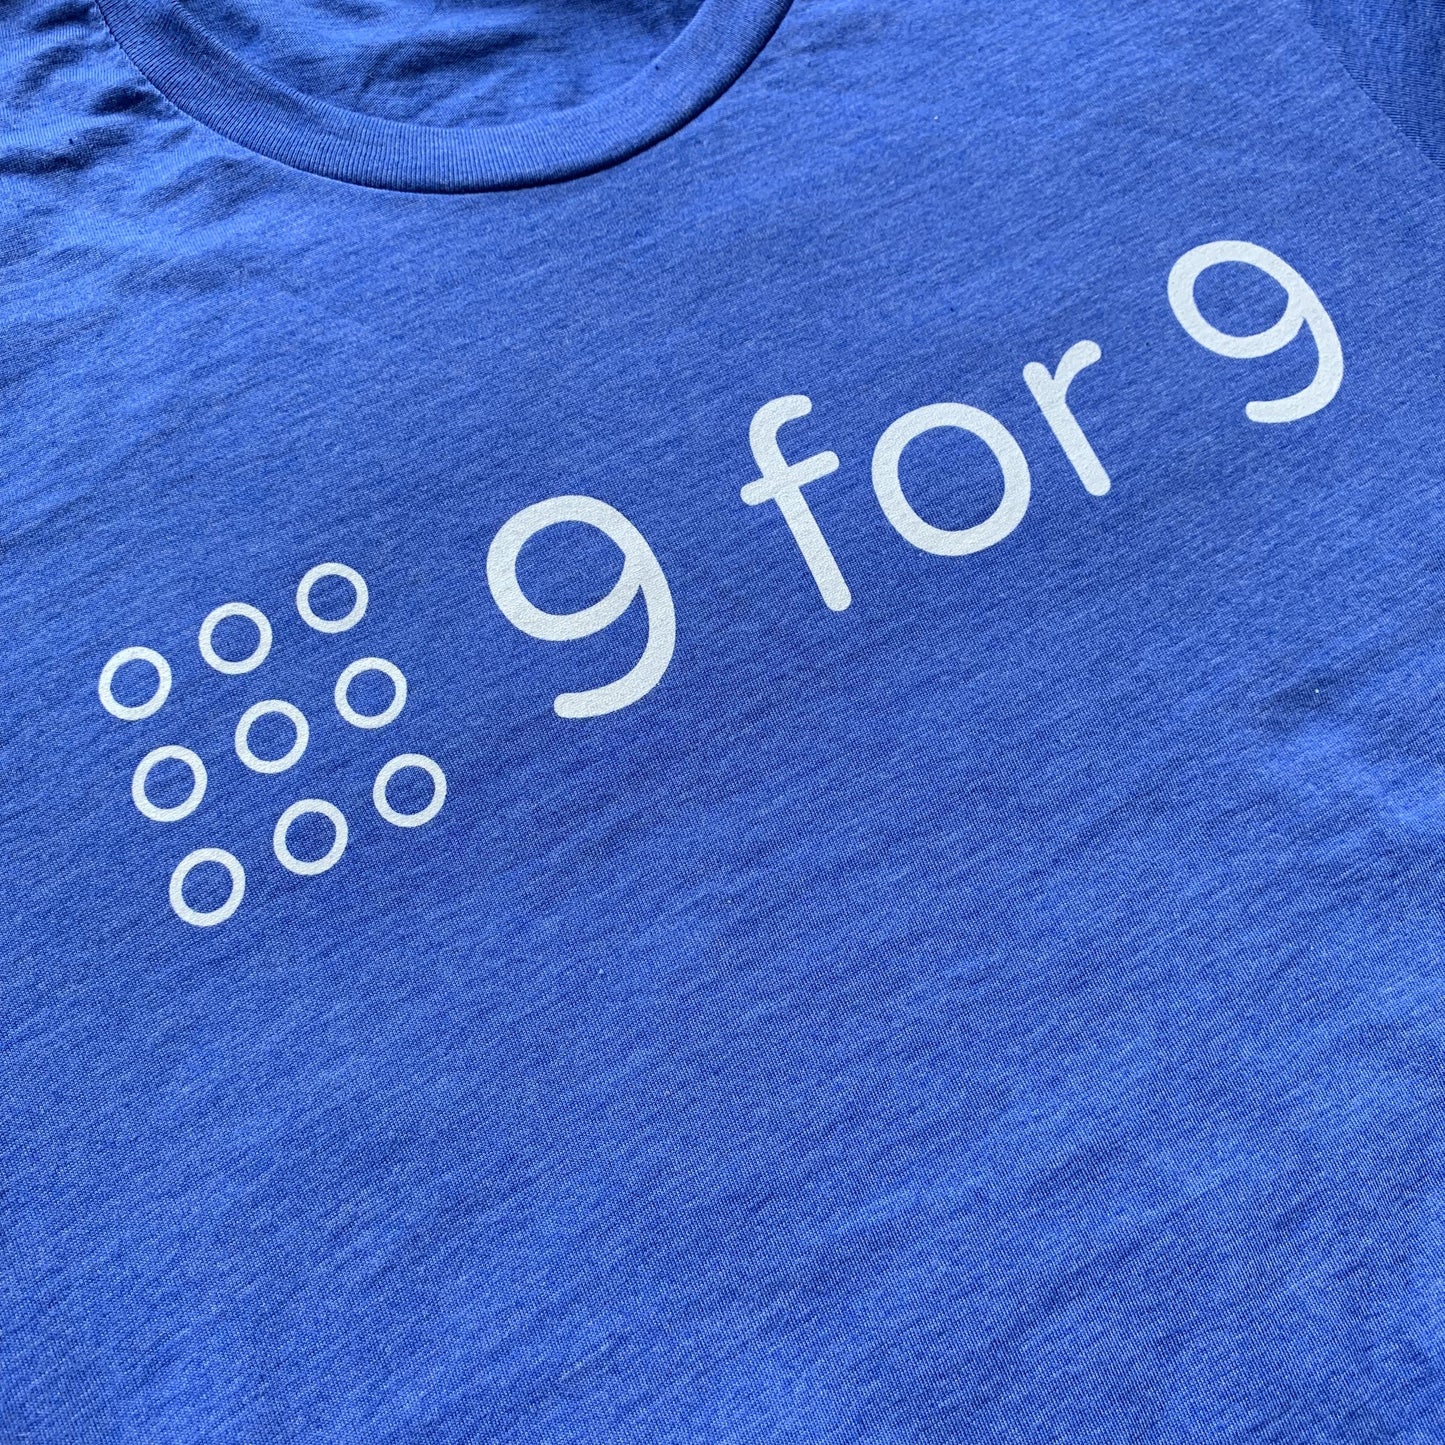 9 for 9 Unisex Tee (Heather Royal Blue) - 9 for 9